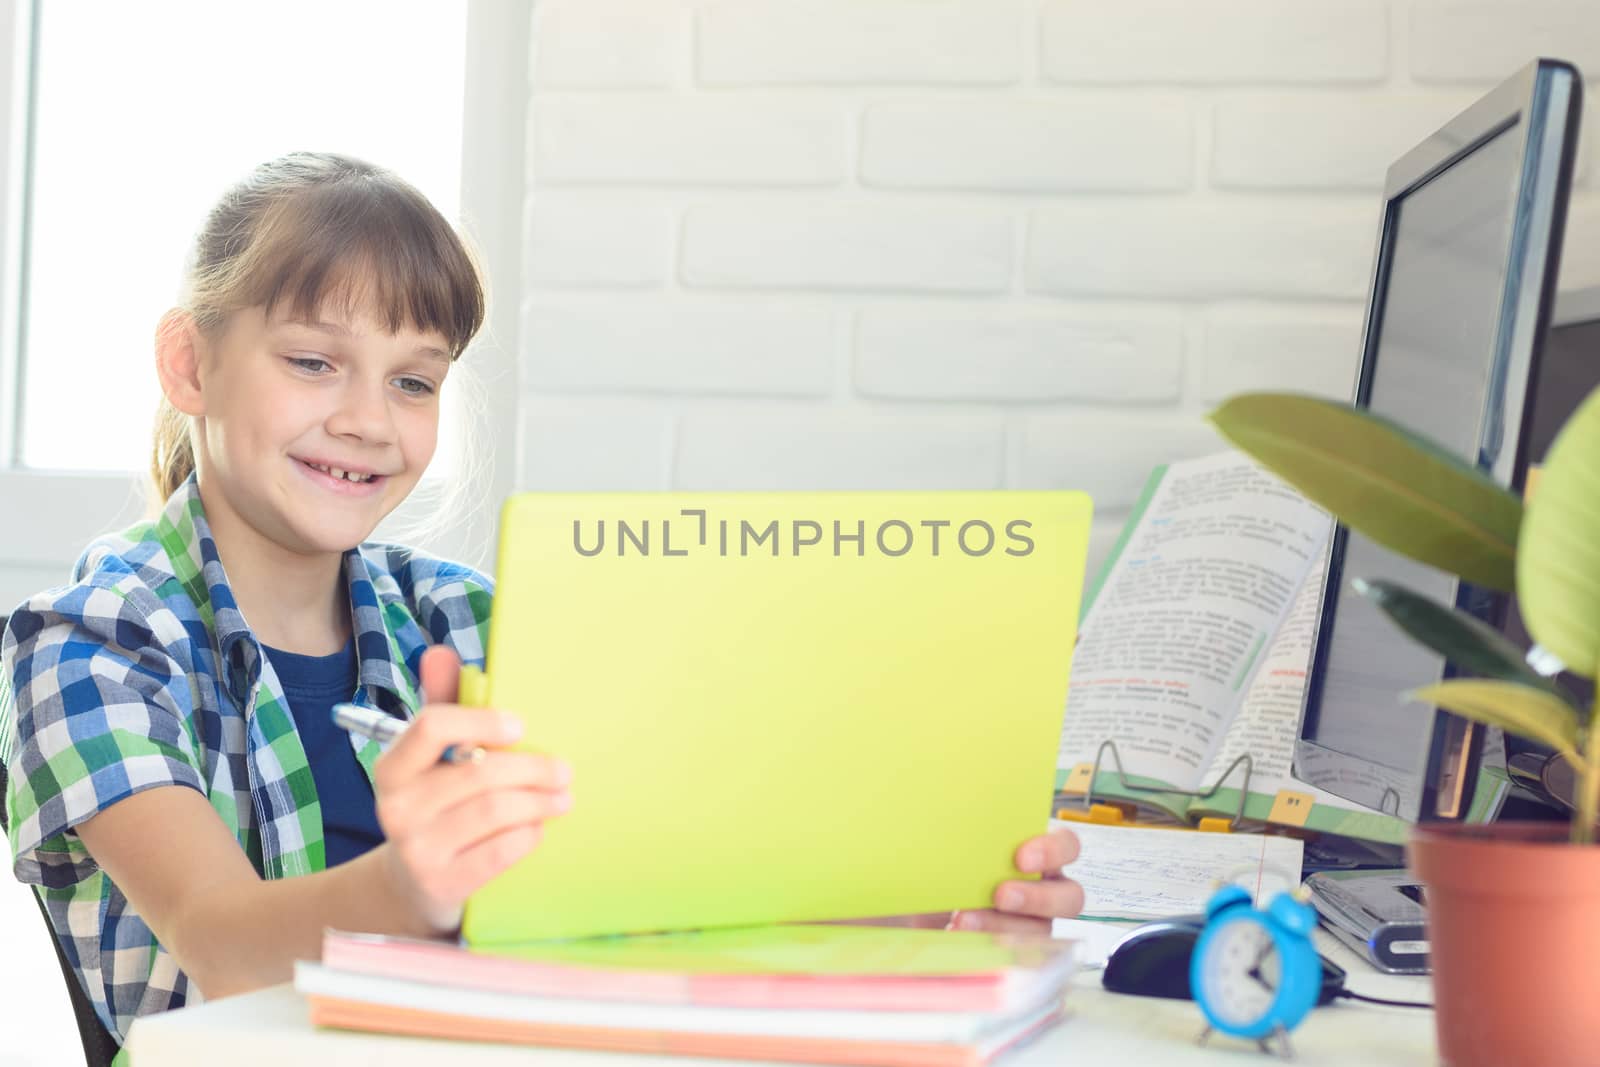 A ten year old girl happily looks at the screen of a tablet computer